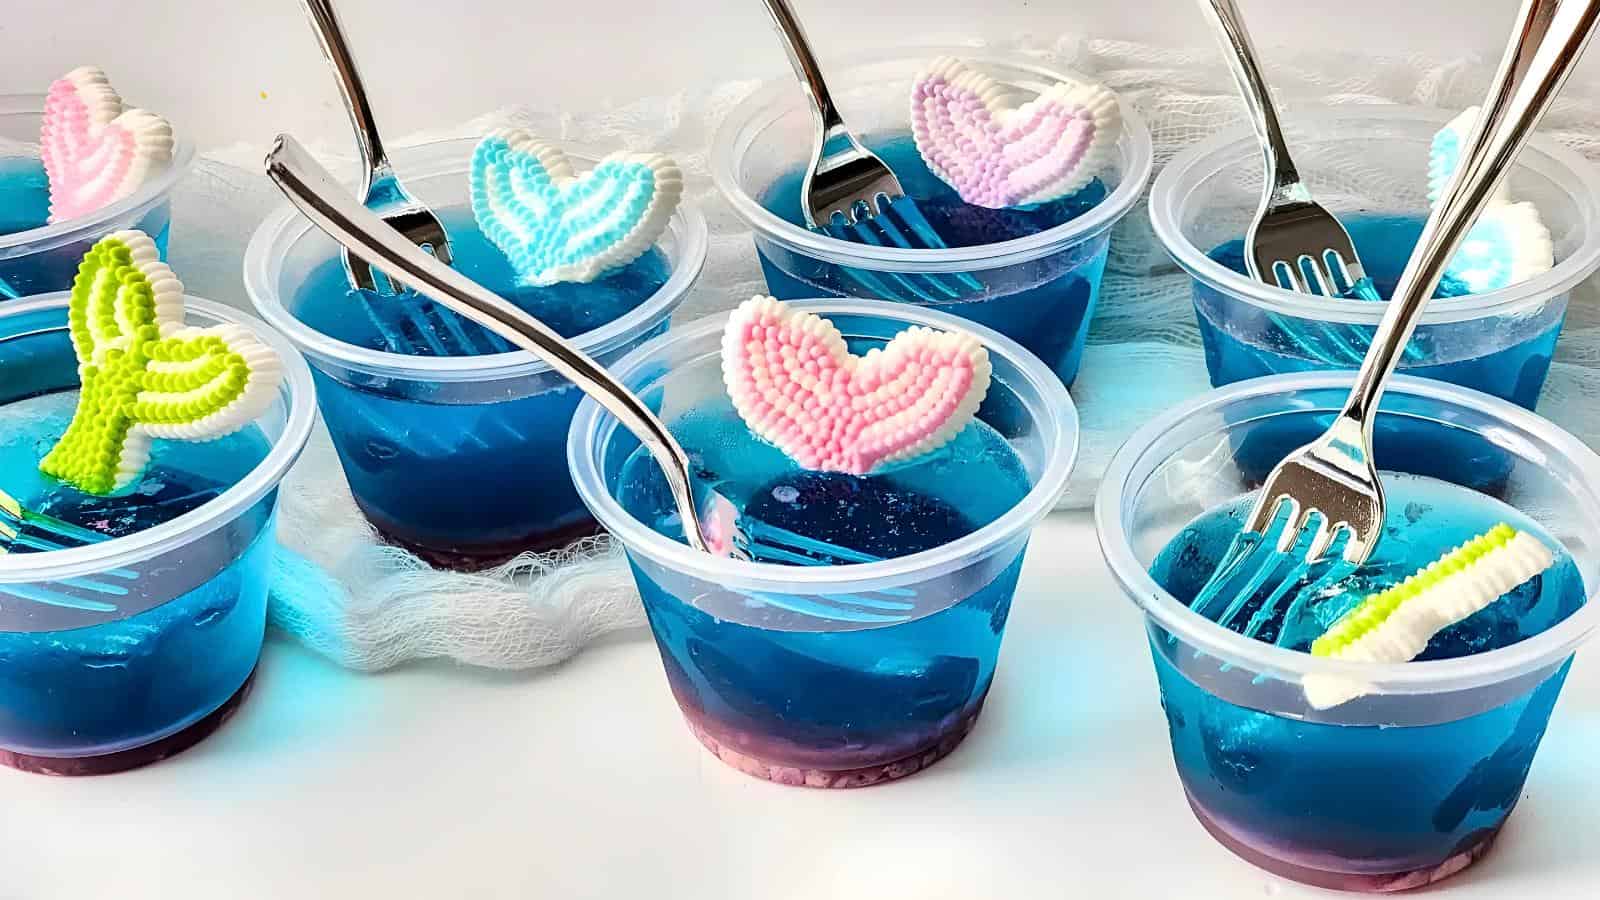 <p>These jello cups bring a splash of oceanic fun to your pool party, featuring layers of blue gelatin and whimsical decorations. Easy to prepare, they can be made ahead of time and stored until the party begins. They’re a hit with children, providing a sweet and visually appealing treat that fits the beach or mermaid theme. The individual servings make them convenient and mess-free for guests. These cups add a delightful, sea-inspired touch to your snack table, perfect for a fun pool party.<br><strong>Get the Recipe: </strong><a href="https://arkansasgirls.com/blue-ocean-cups/?utm_source=msn&utm_medium=page&utm_campaign=msn" rel="noopener">Blue Ocean Cups (Mermaid Jello Cups) for a Mermaid Party</a></p>